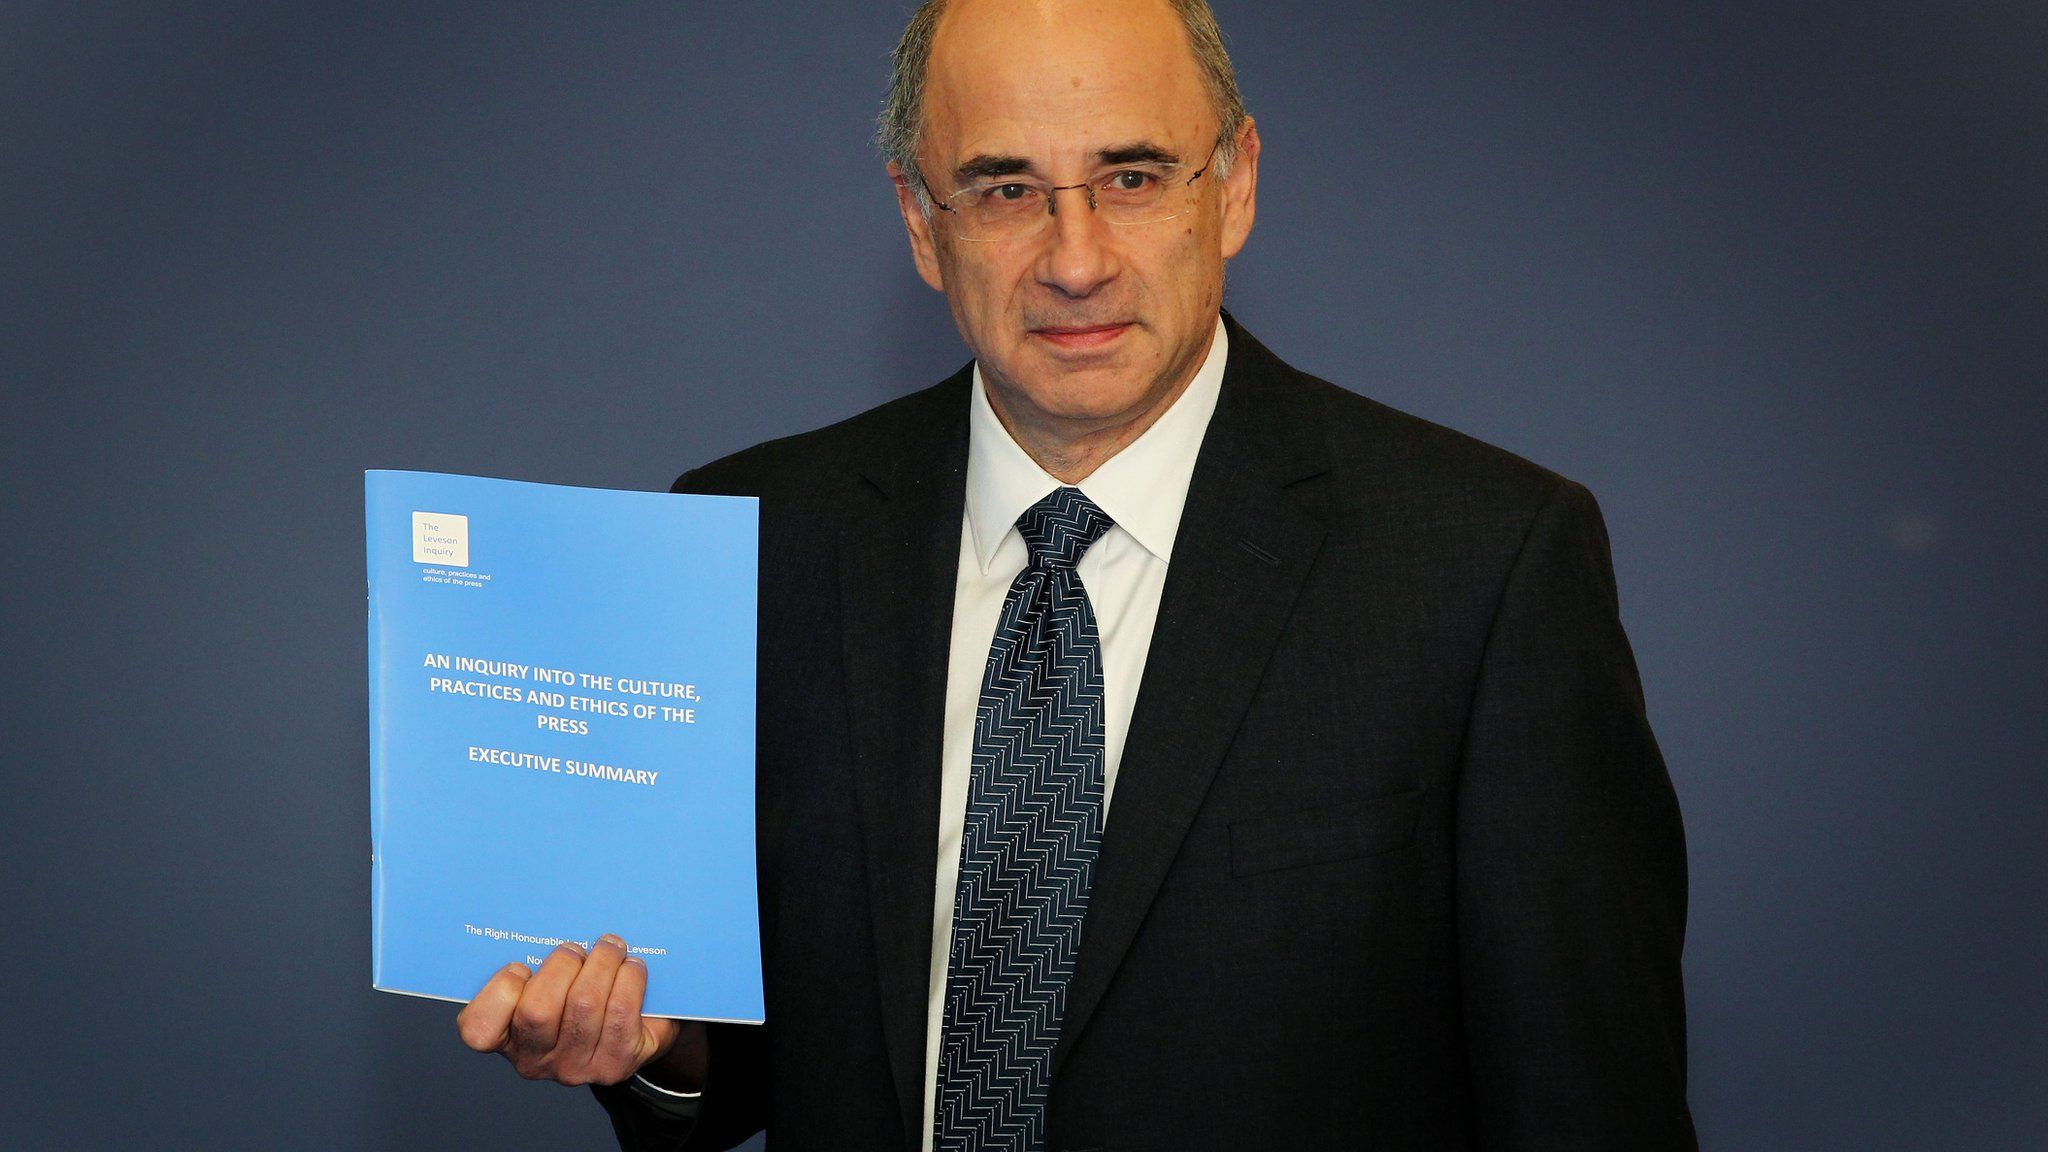 Lord Justice Leveson with his report into press ethics